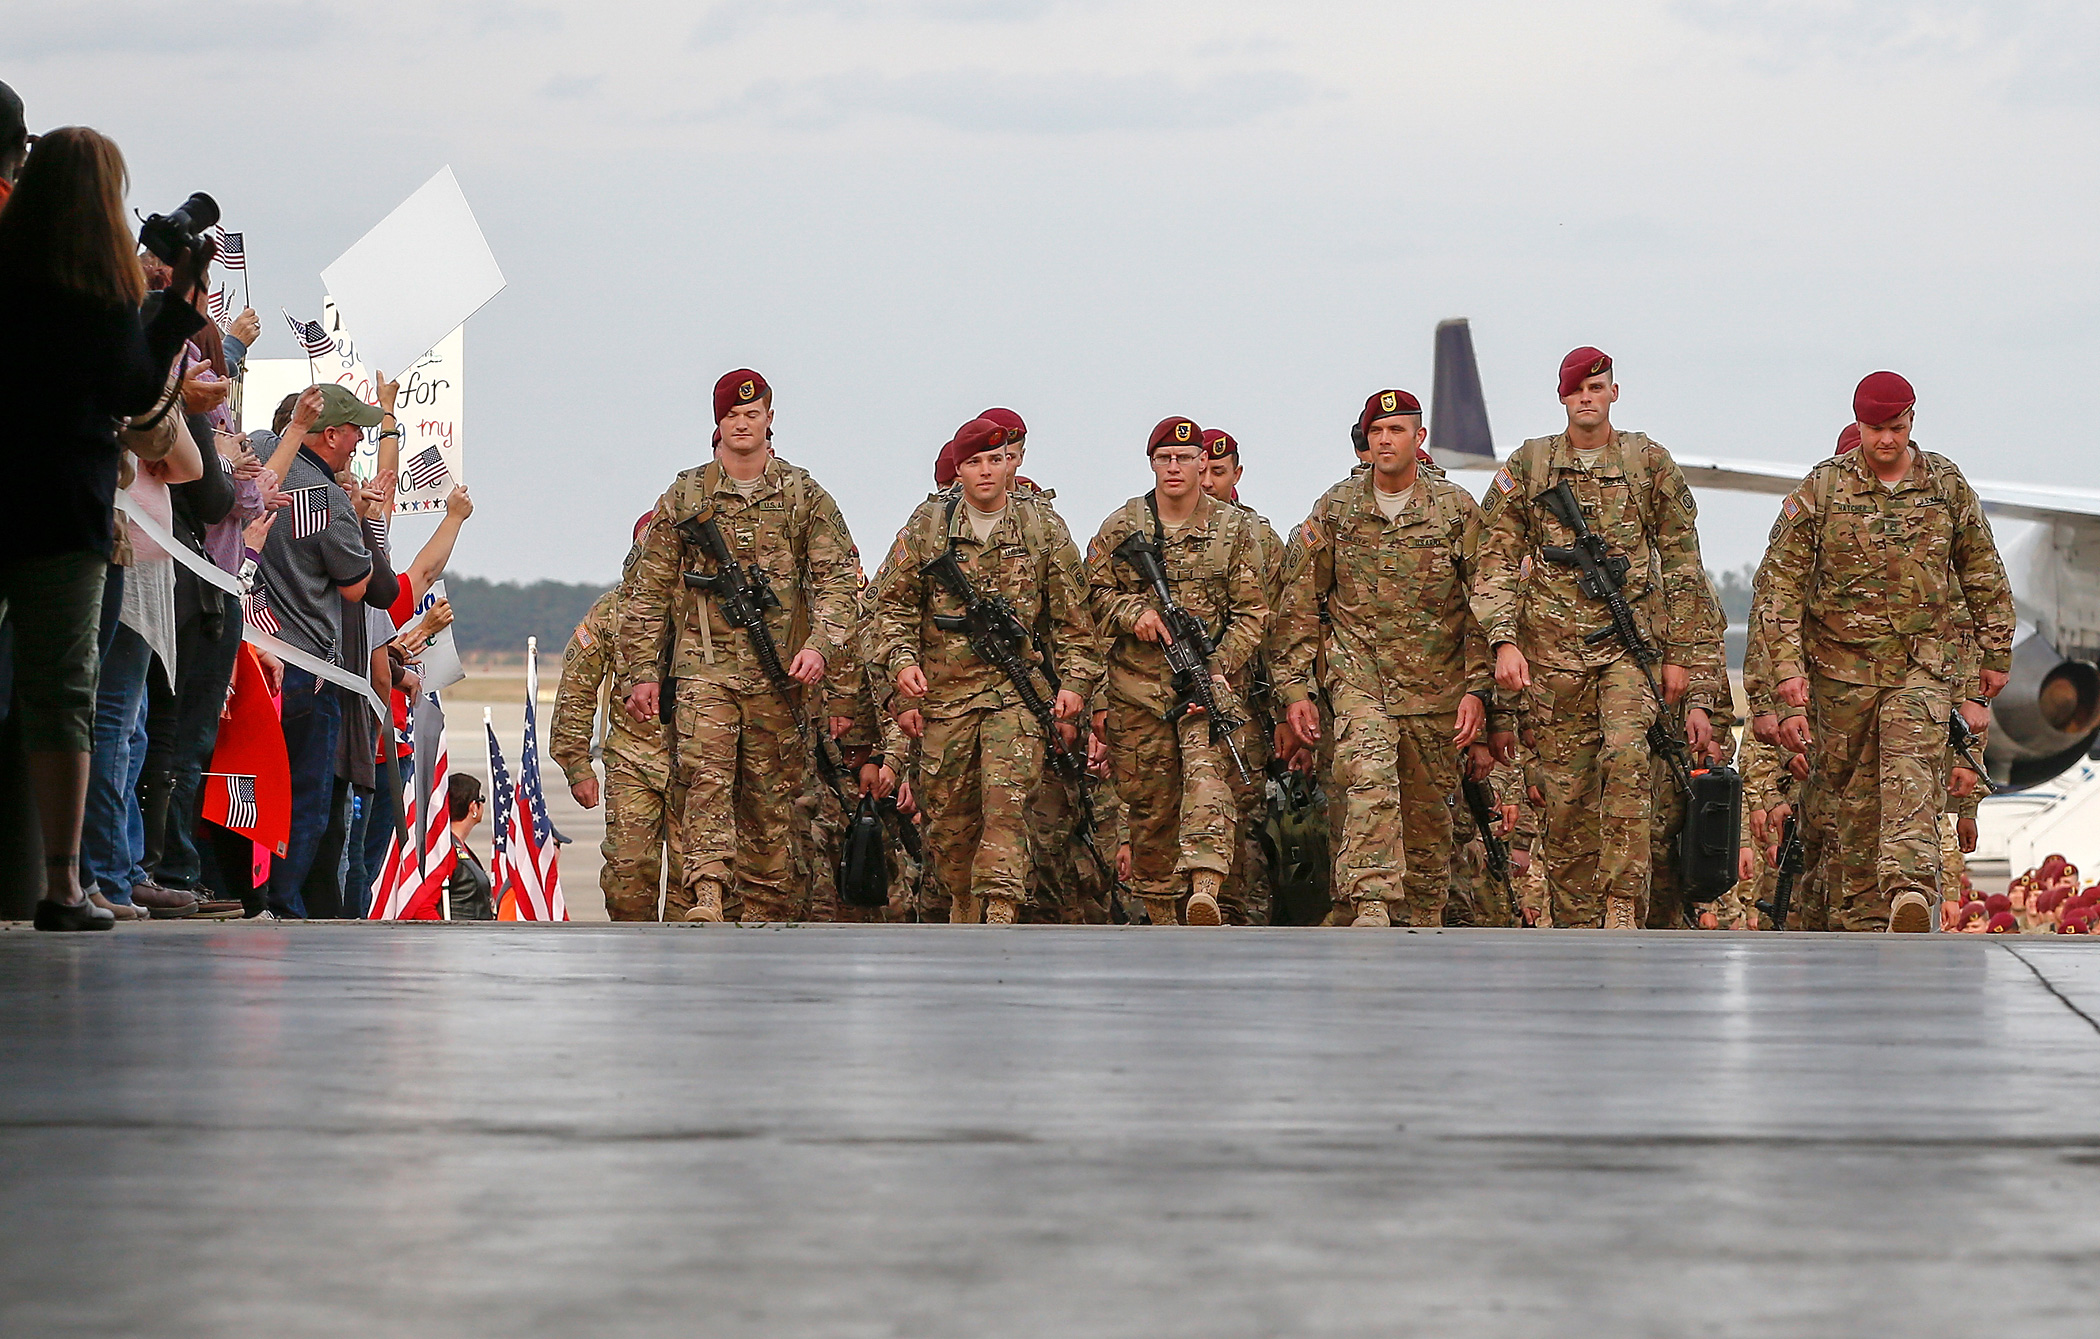 Paratroopers with the 1st Brigade Combat Team, 82nd Airborne Division, march up the ramp as they return home from Afghanistan at Pope Army Airfield in Fort Bragg, NC on Nov. 5, 2014. (Chris Keane—Reuters)